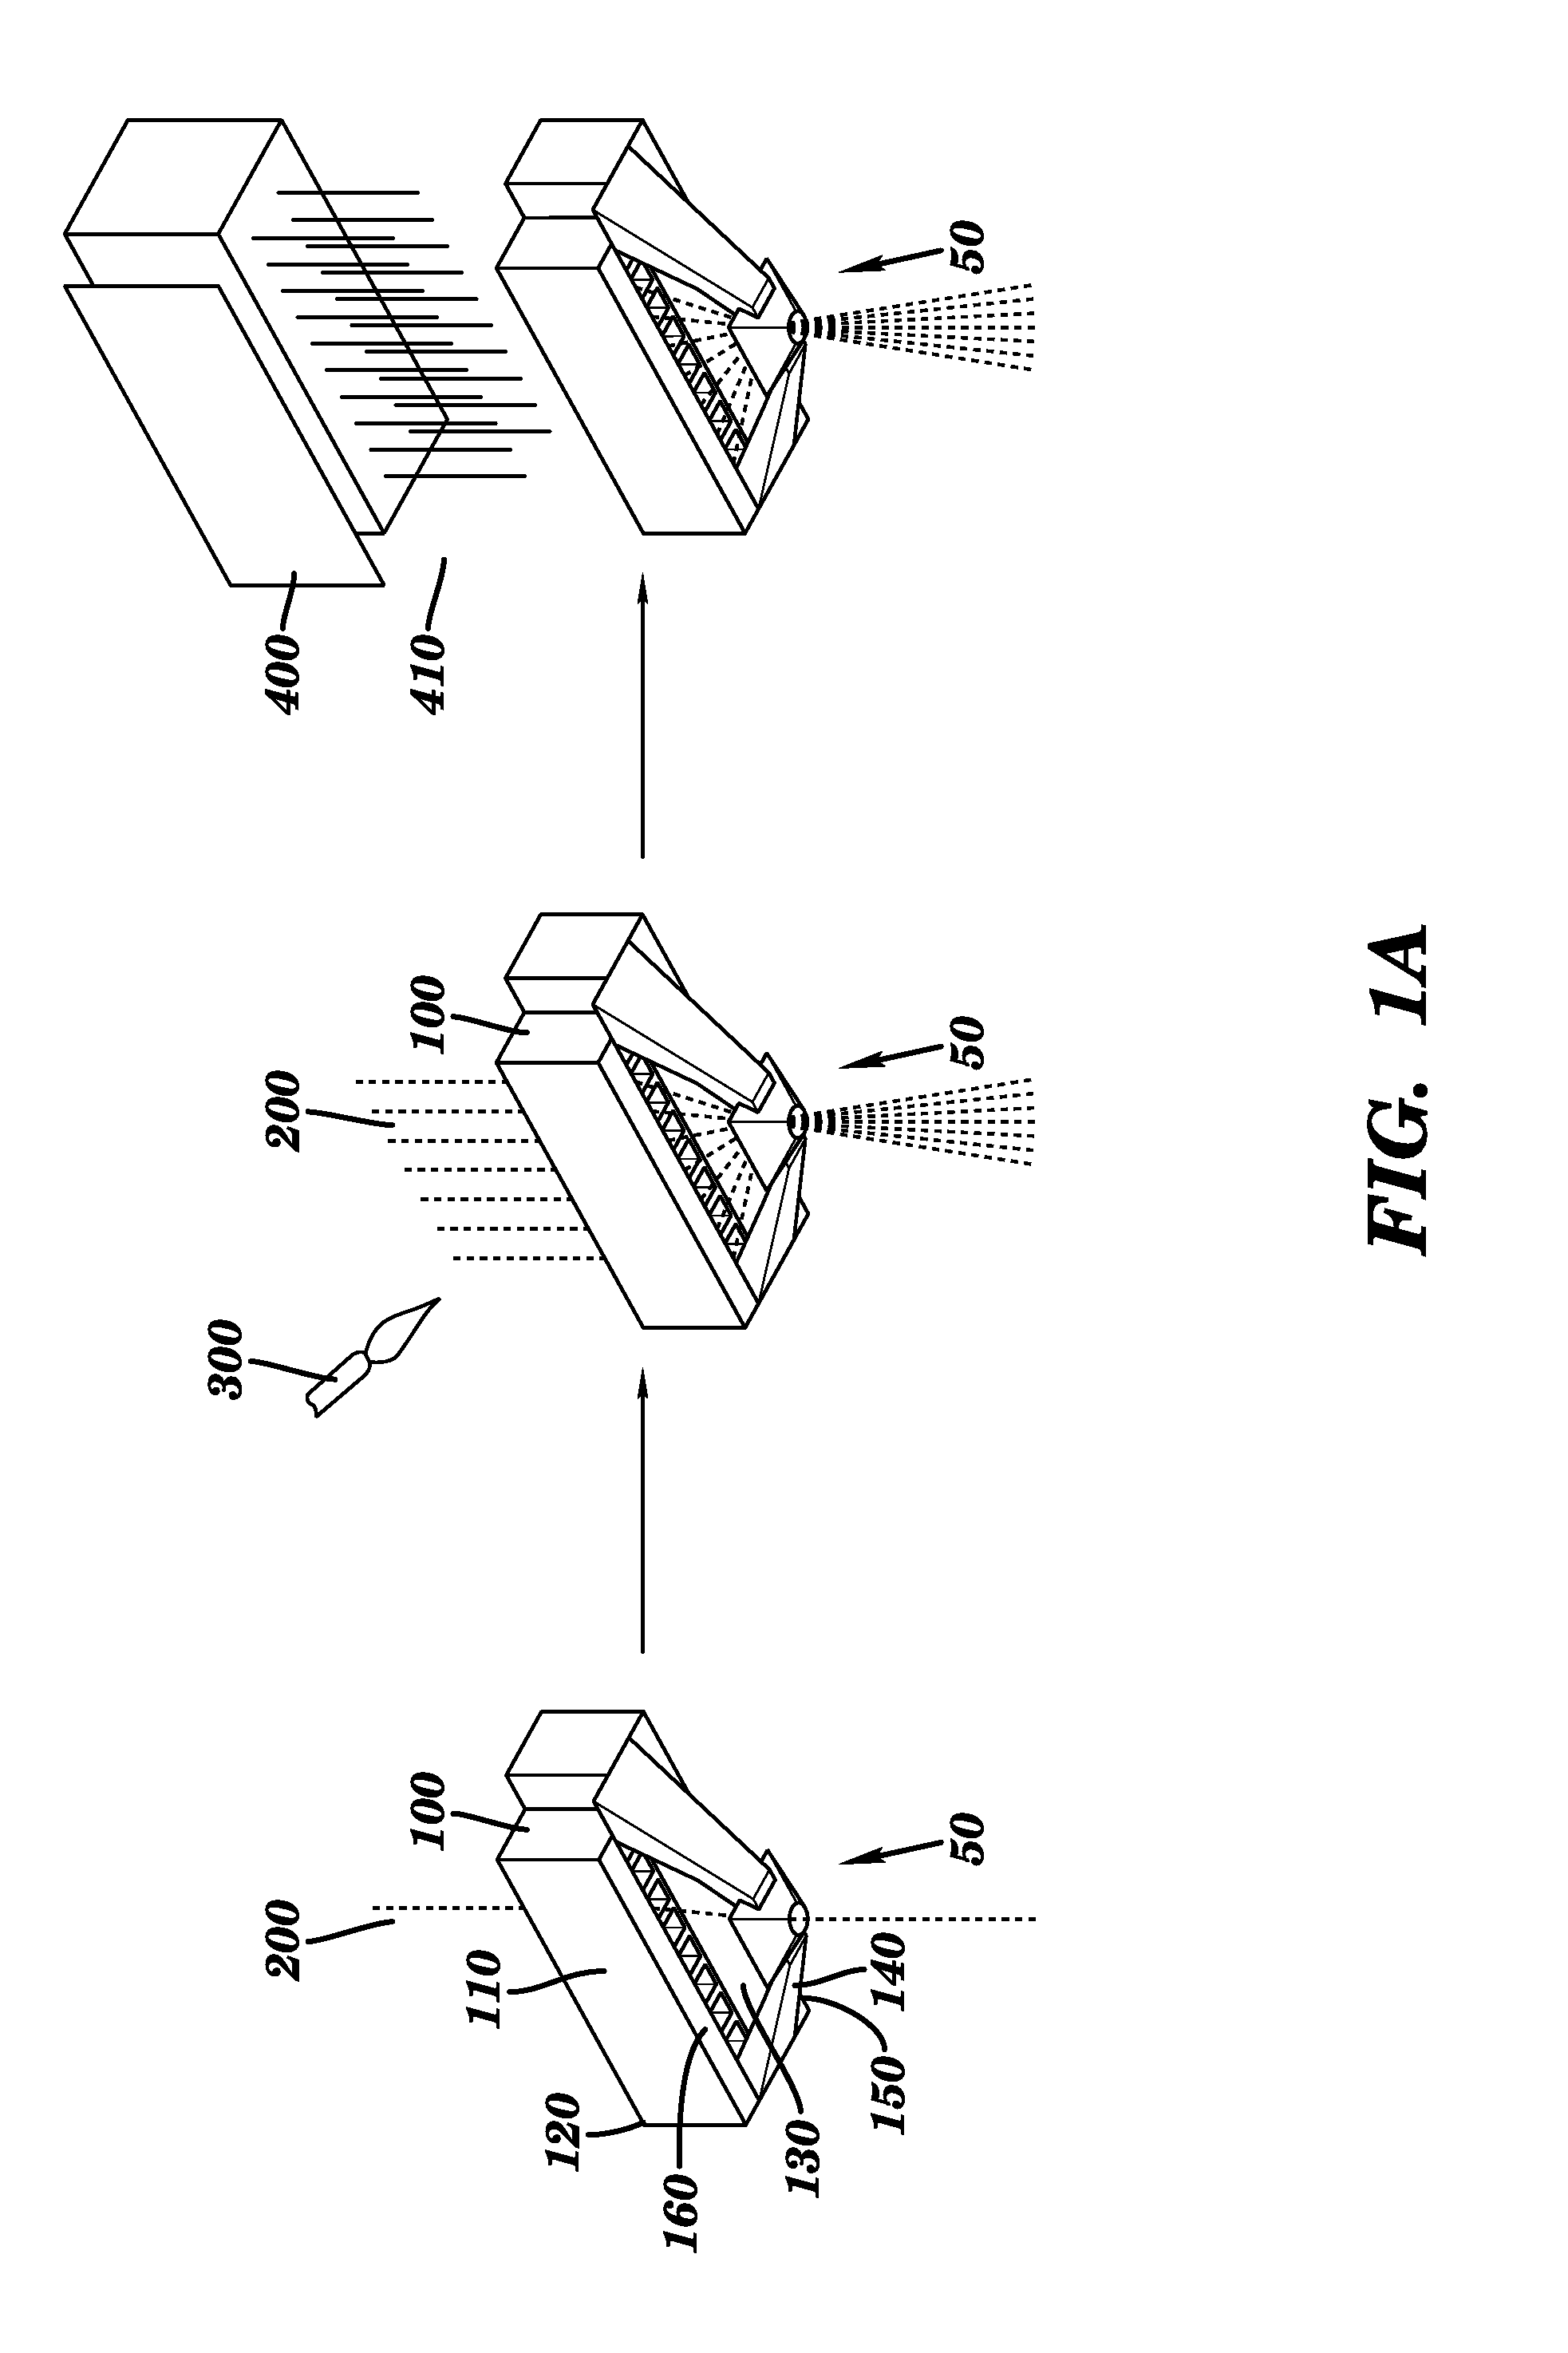 Minimally invasive splaying microfiber electrode array and methods of fabricating and implanting the same